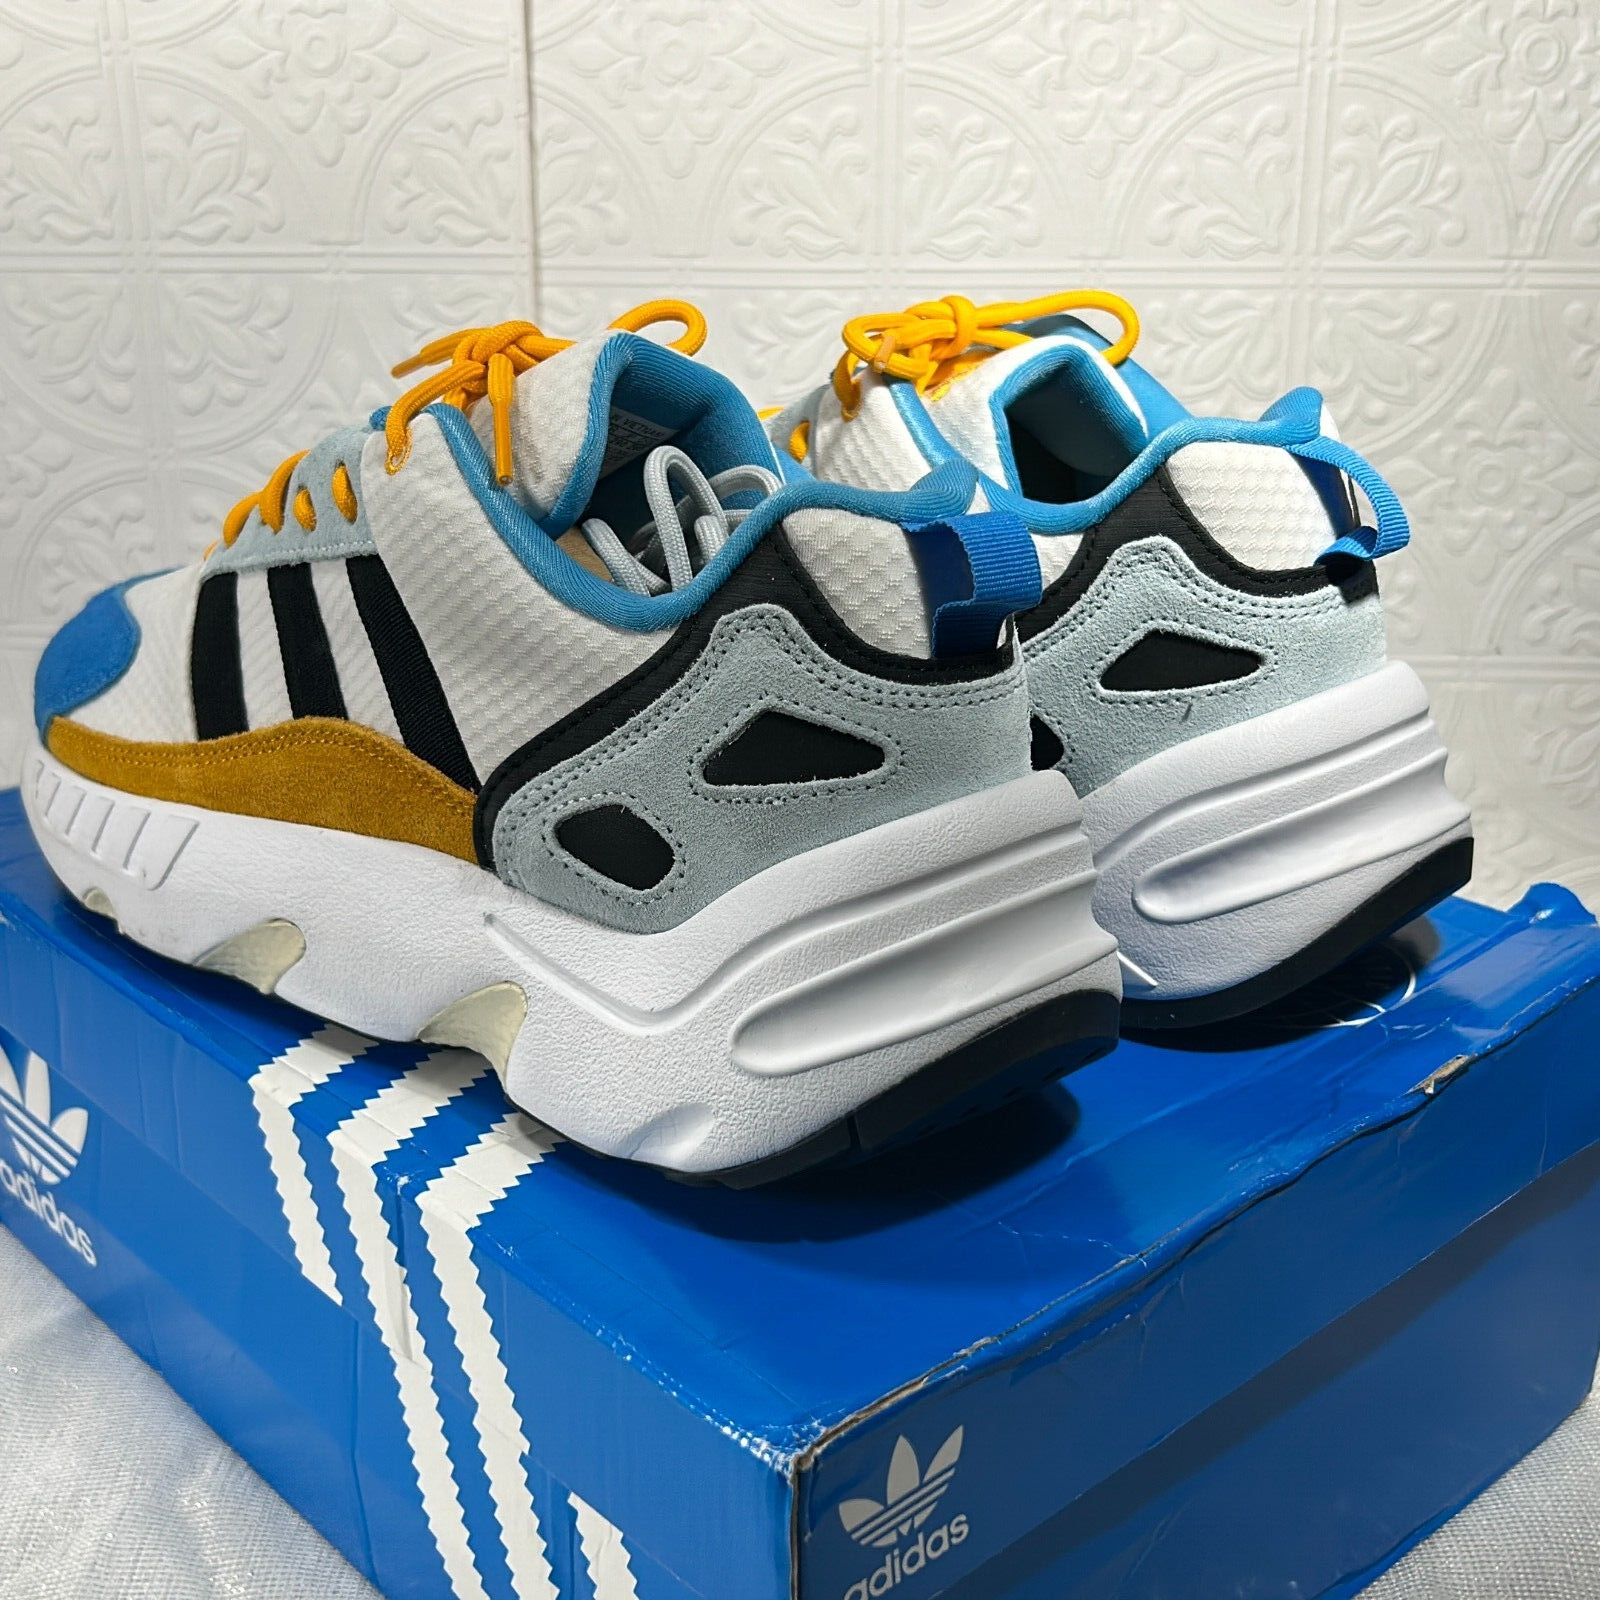 Adidas ZX 22 Boost HP7722 White/Gold/Blue Sneaker Shoes Mens Size 11